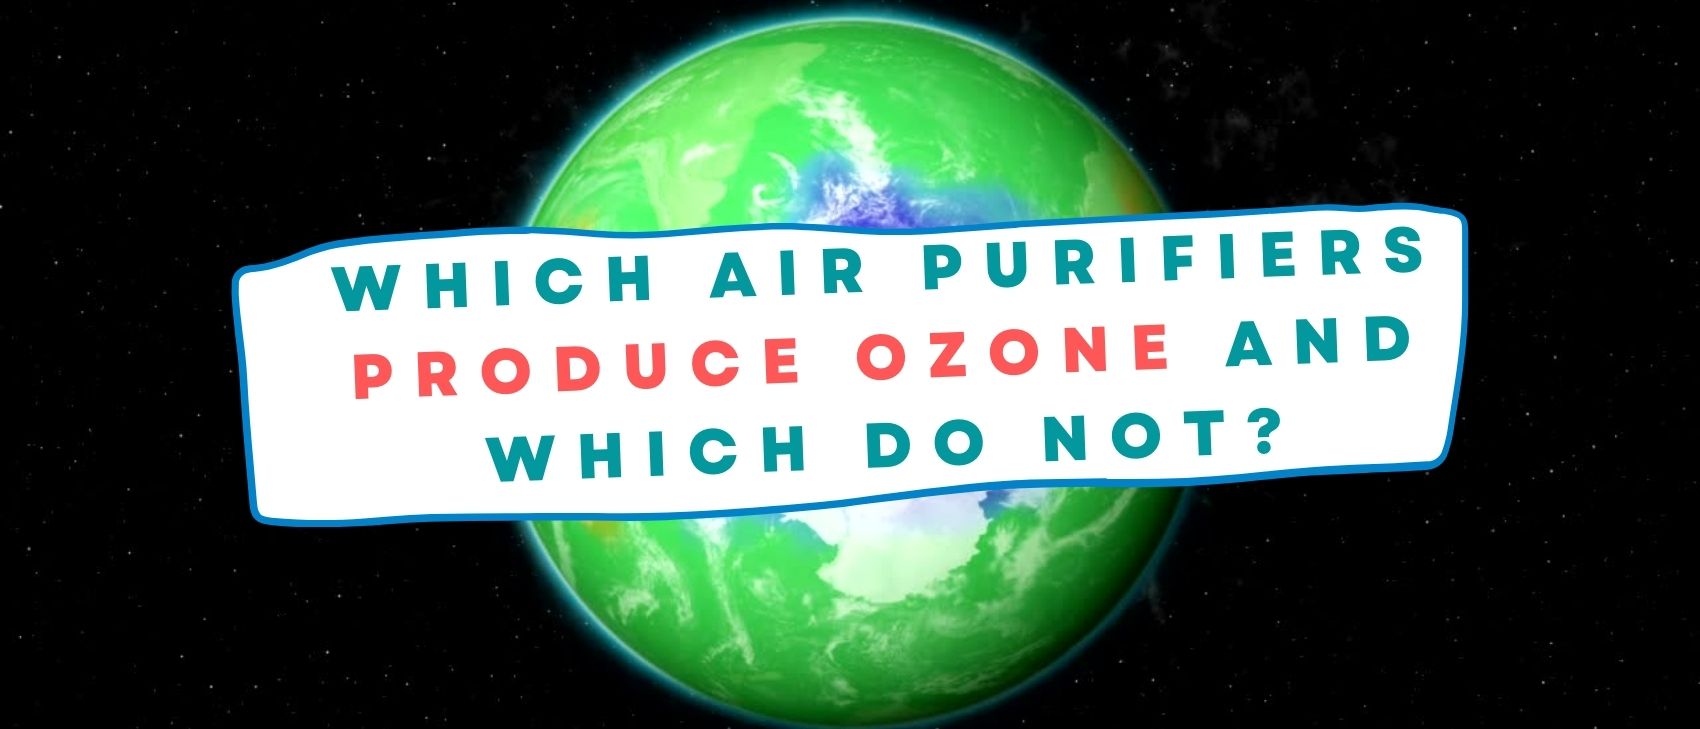 air purifiers produce ozone